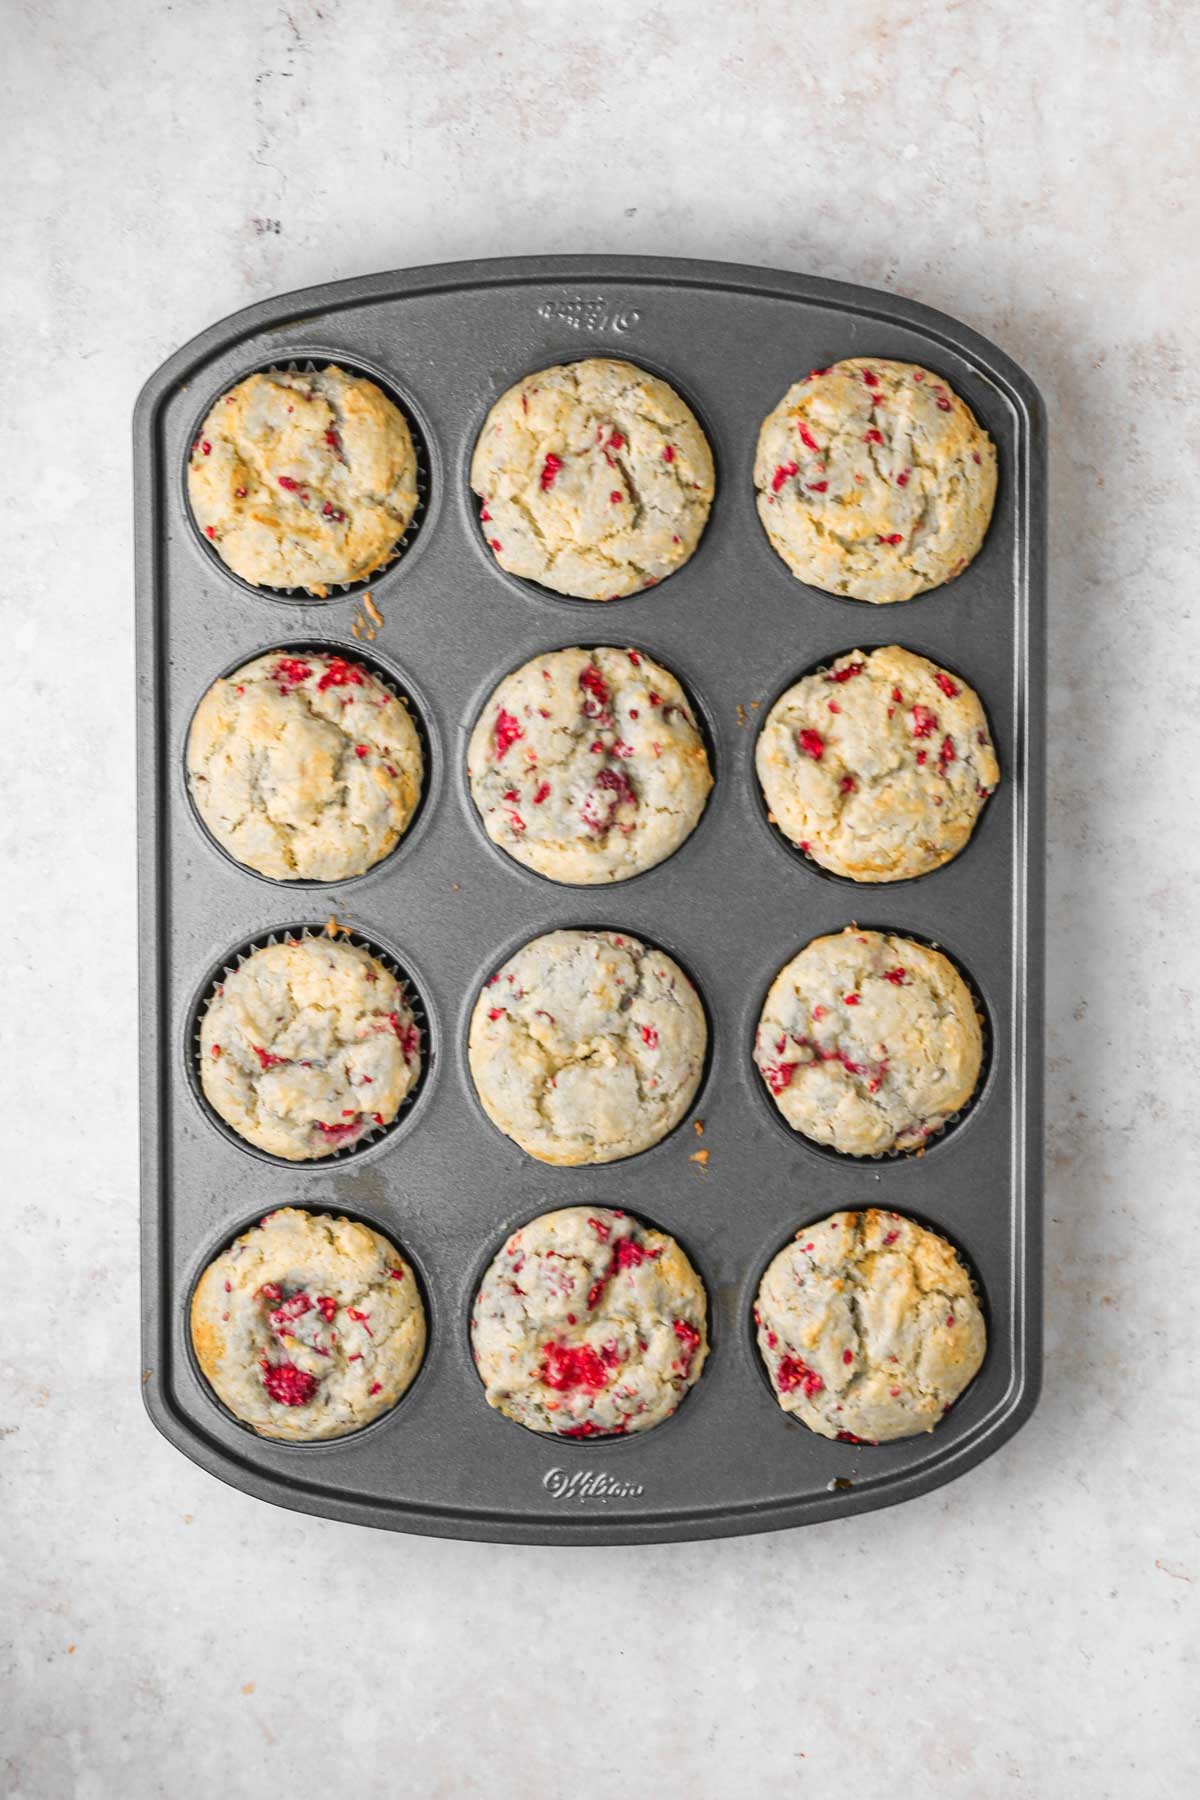 baked raspberry muffins in a gray muffin pan.